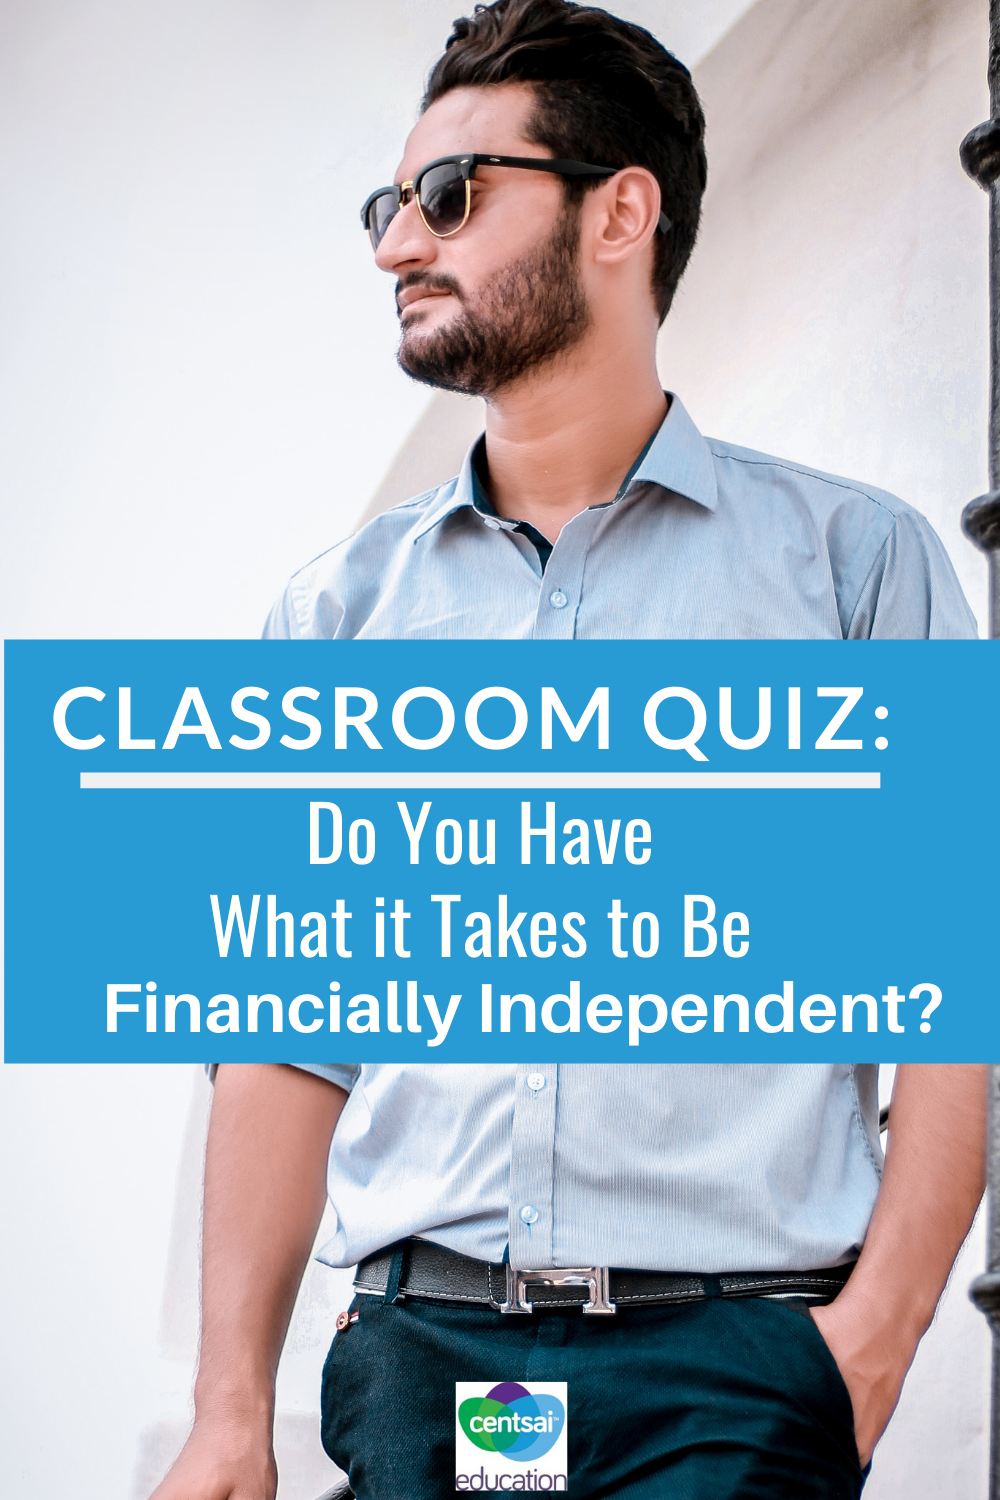 We understand —- most classes aren't filled with students who are financially independent. But that doesn't mean they can't be filled with students who don't know what it takes. #quiz #financiallyindependent #college #tips